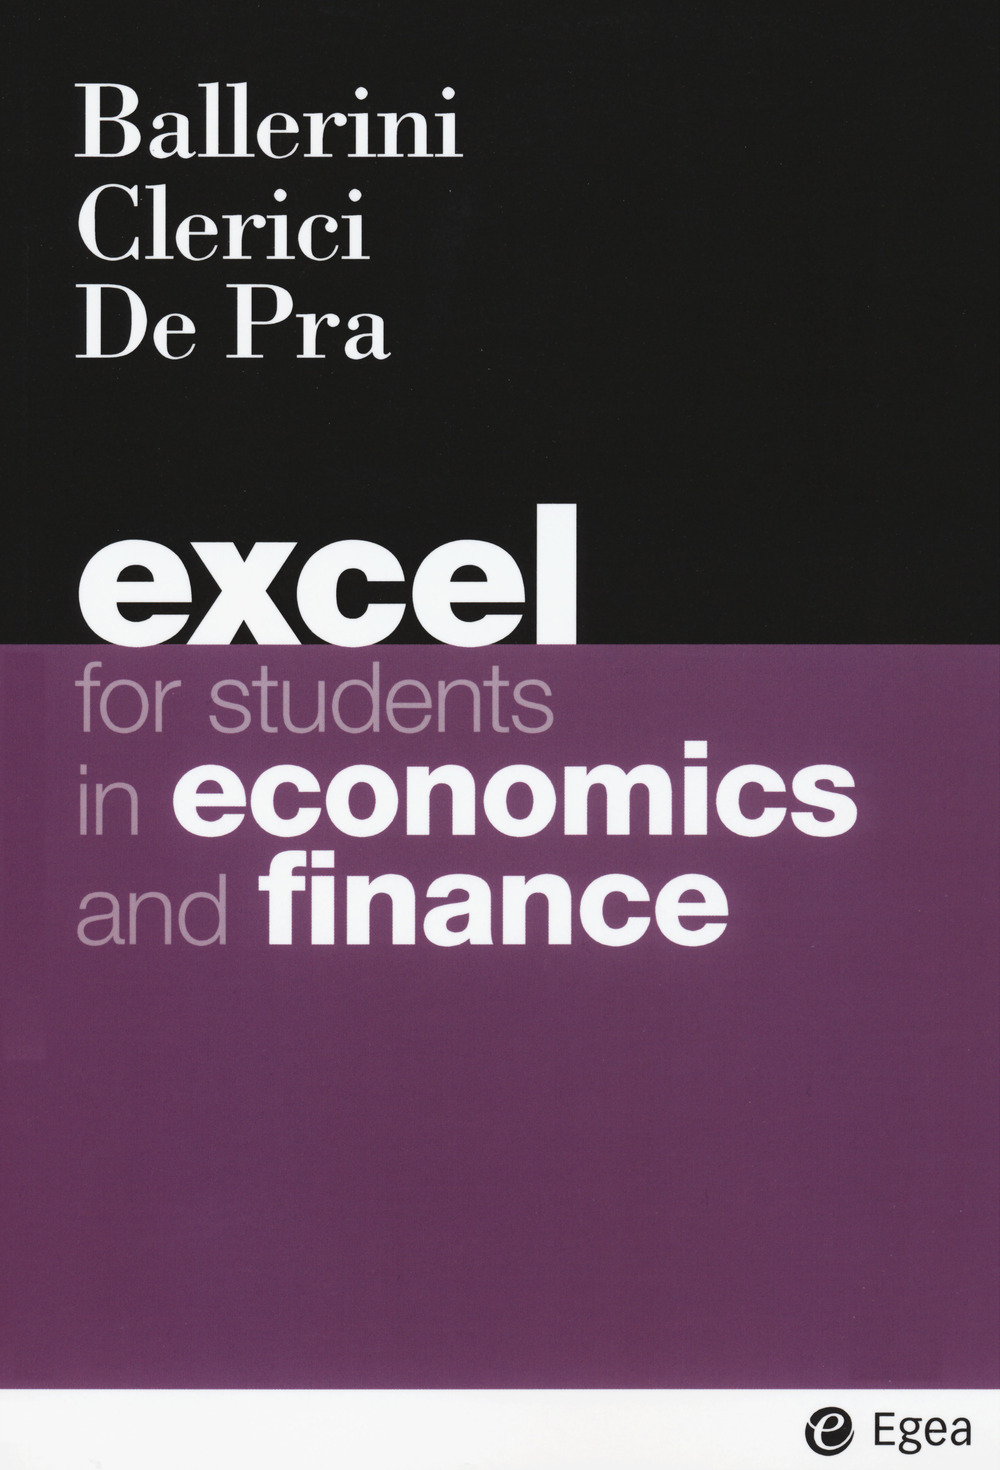 Image of Excel for students in economics and finance